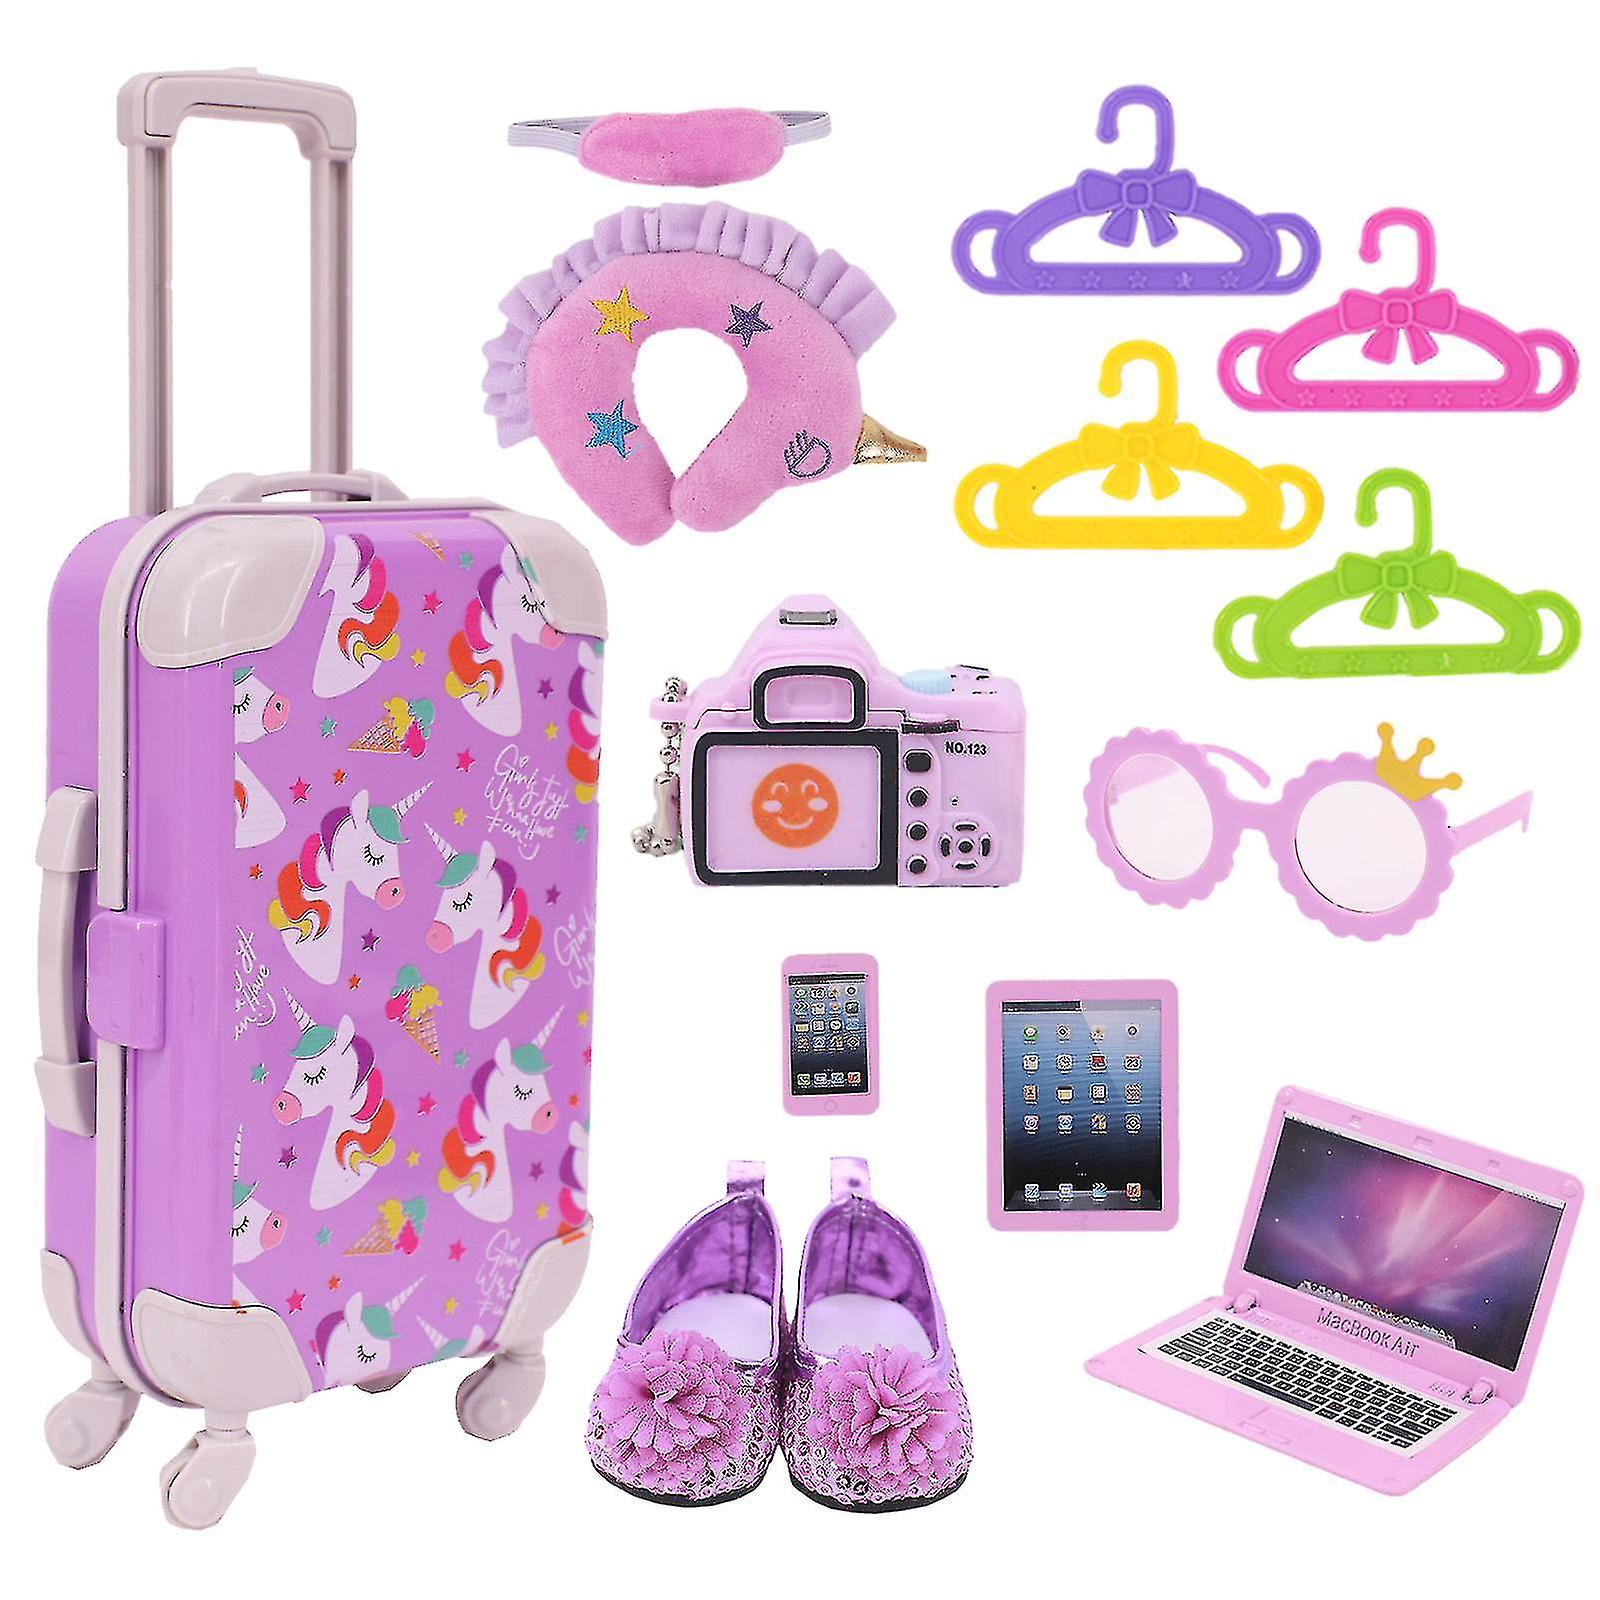 ZITA ELEMENT 18 Inch Girl Doll Suitcase & Accessories 23 pcs Doll Suitcase  Travel Luggage Play Set for 18 Inch Doll Travel Doll Accessories